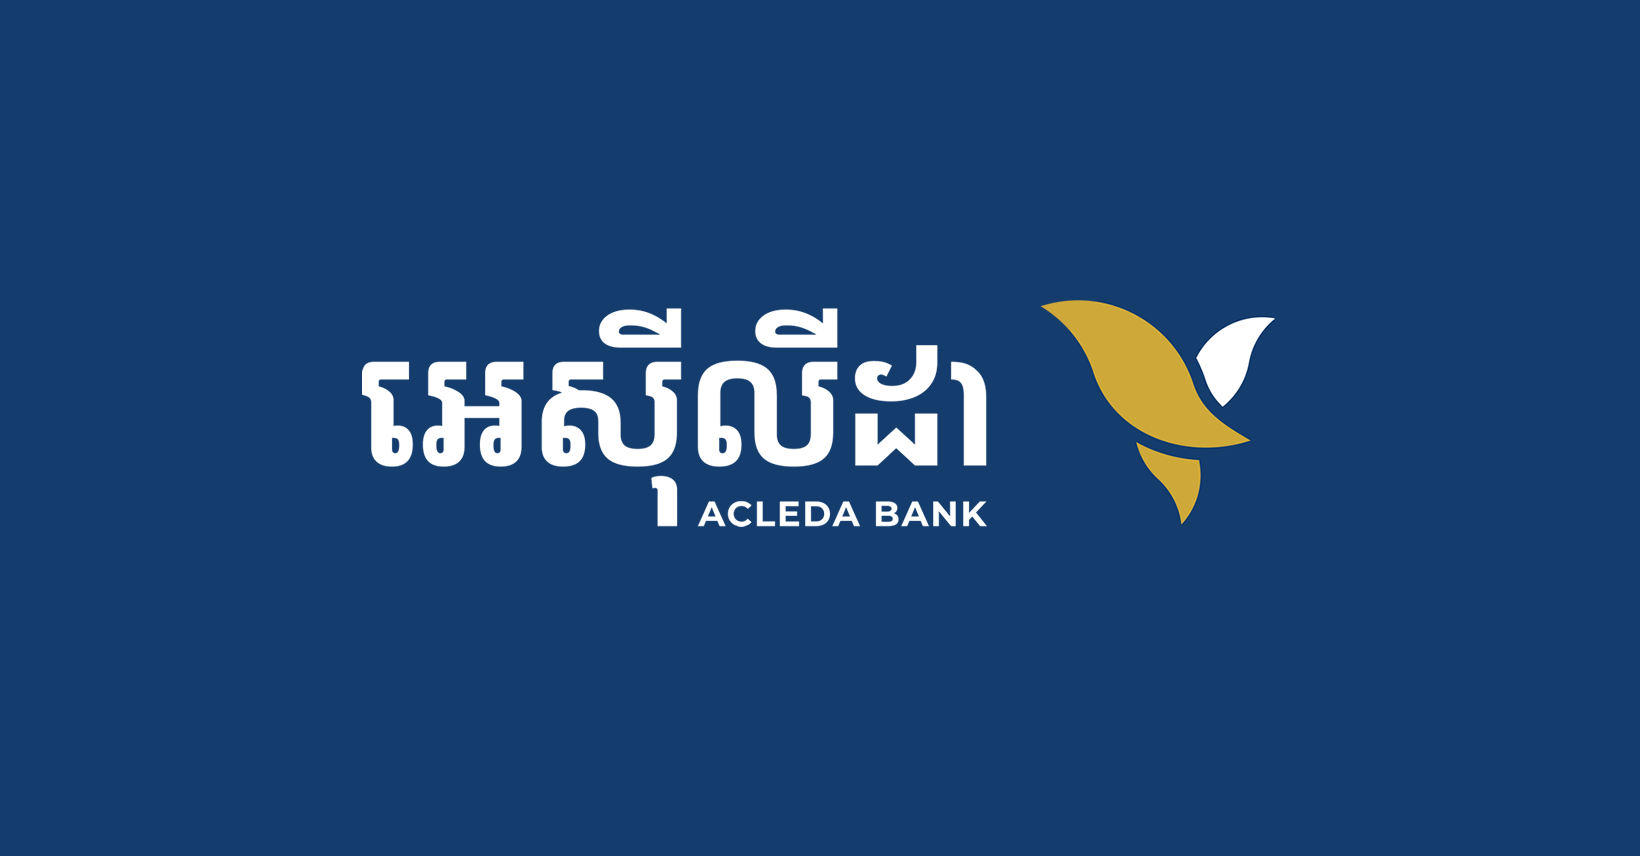 Why has the ACLEDA logo changed